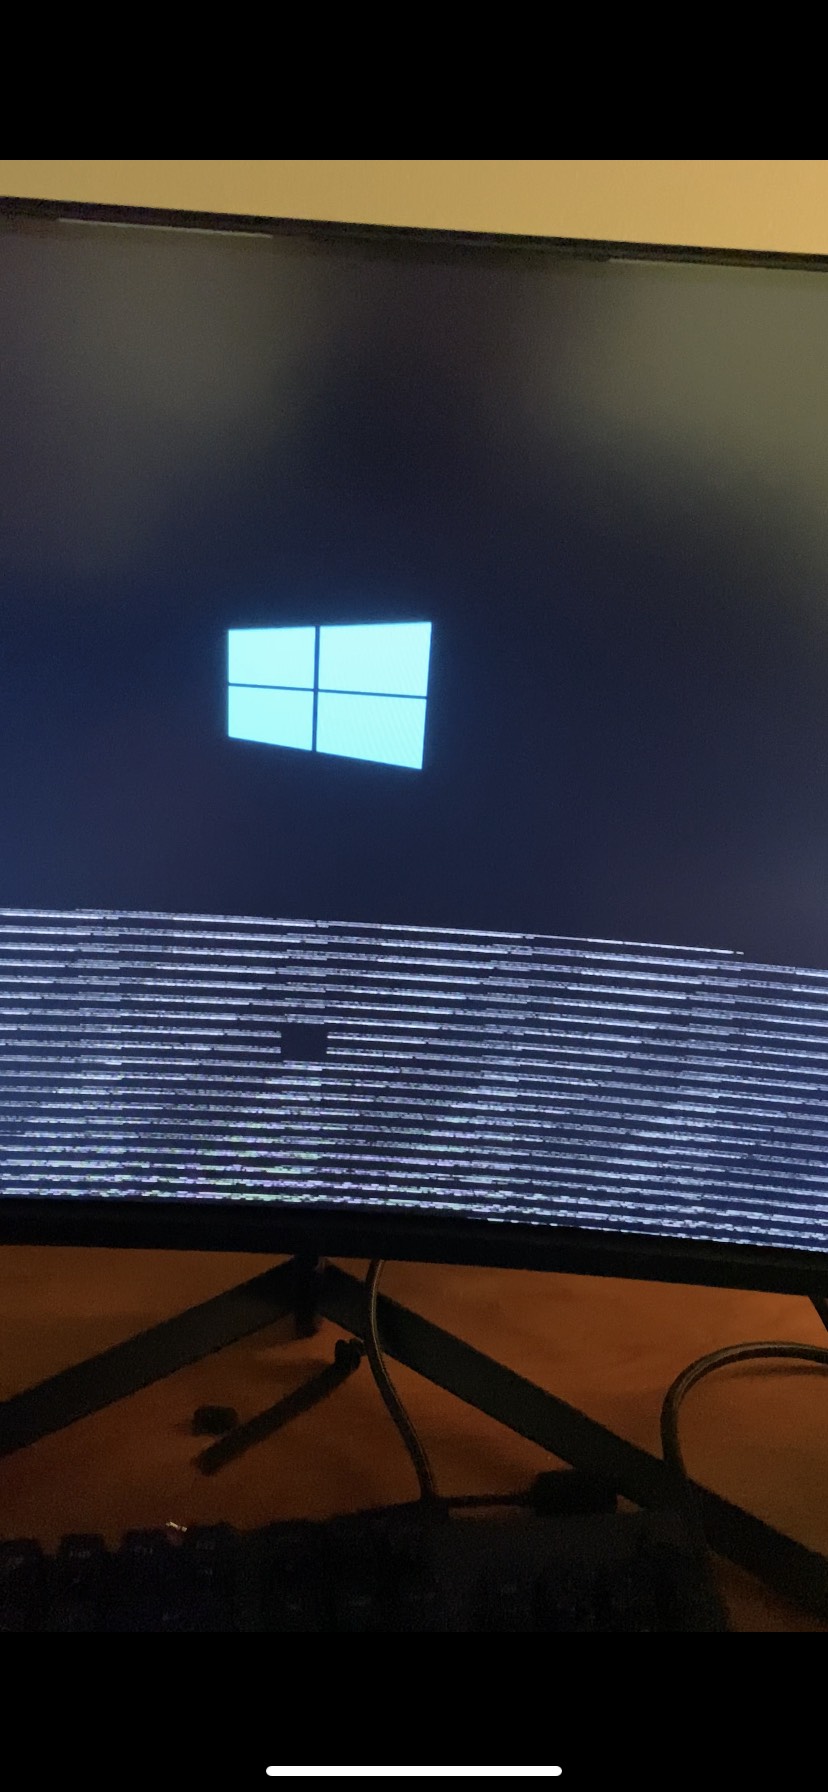 Screen freezes when trying to boot from usb with windows media - Microsoft  Community